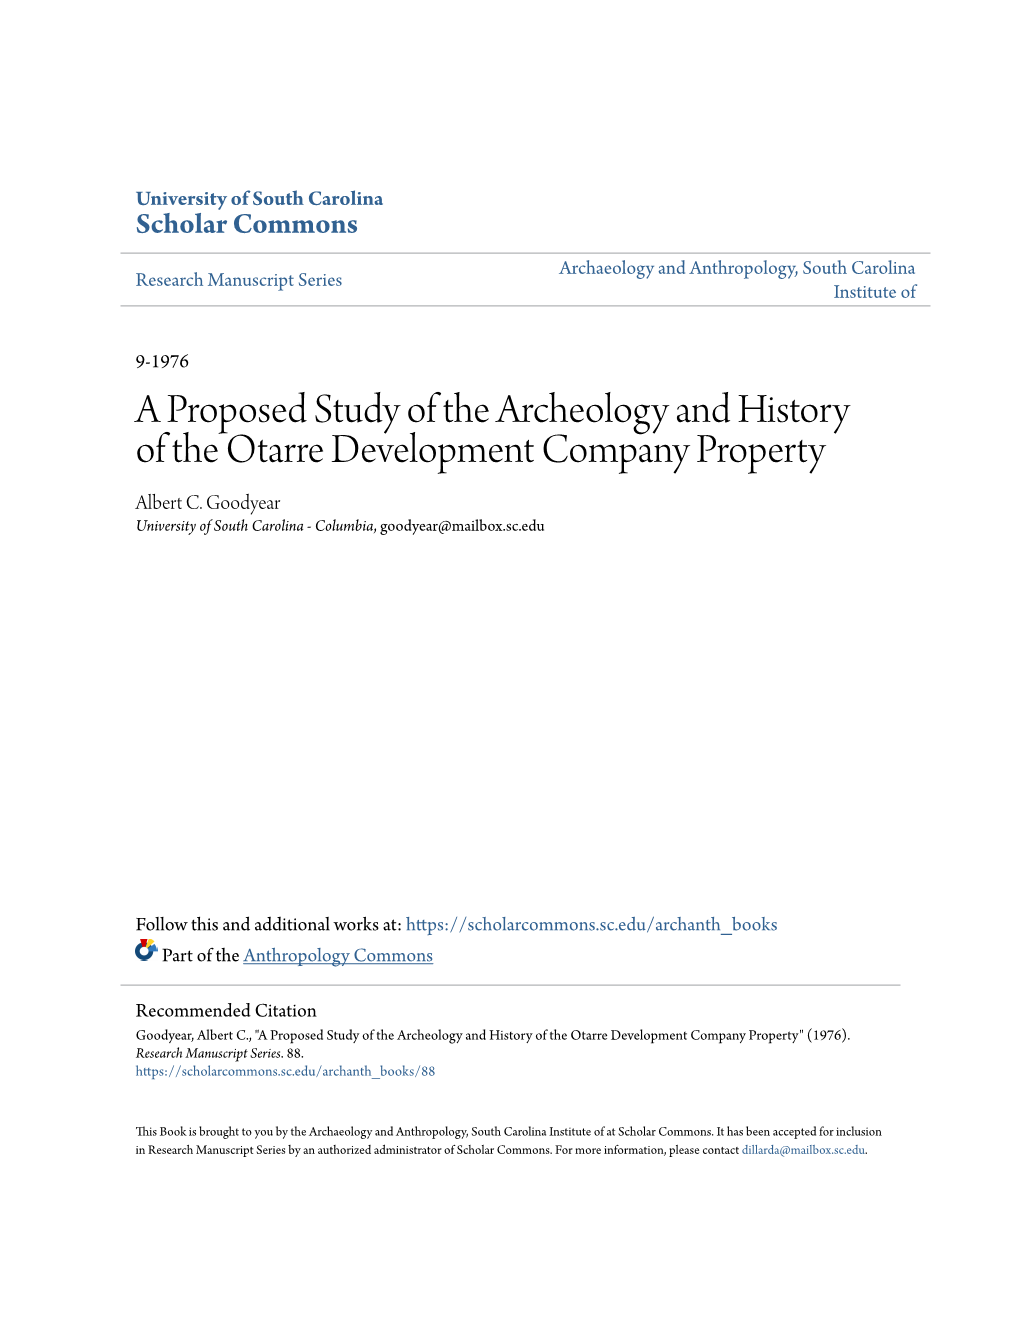 A Proposed Study of the Archeology and History of the Otarre Development Company Property Albert C